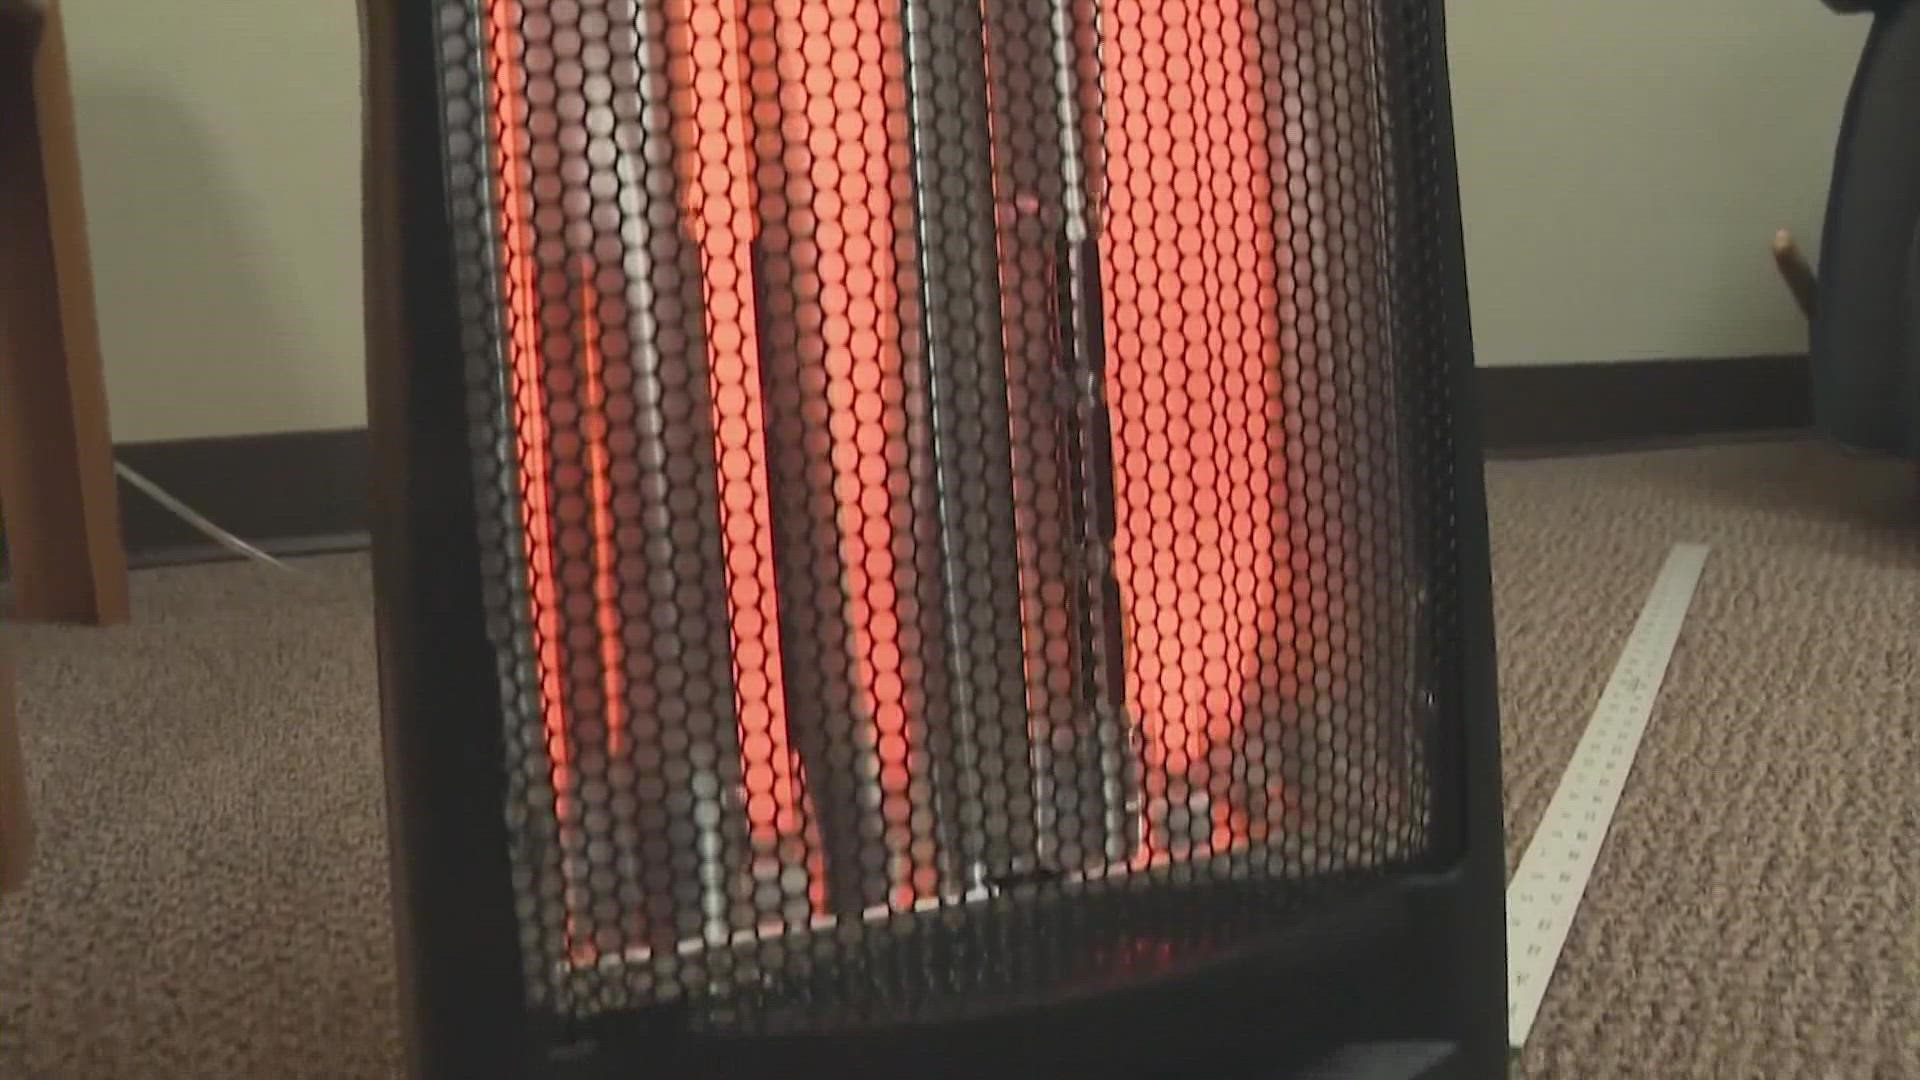 HCFMO advises residents to use the three-foot rule. That means keeping a three-foot perimeter around space heaters and fireplaces.